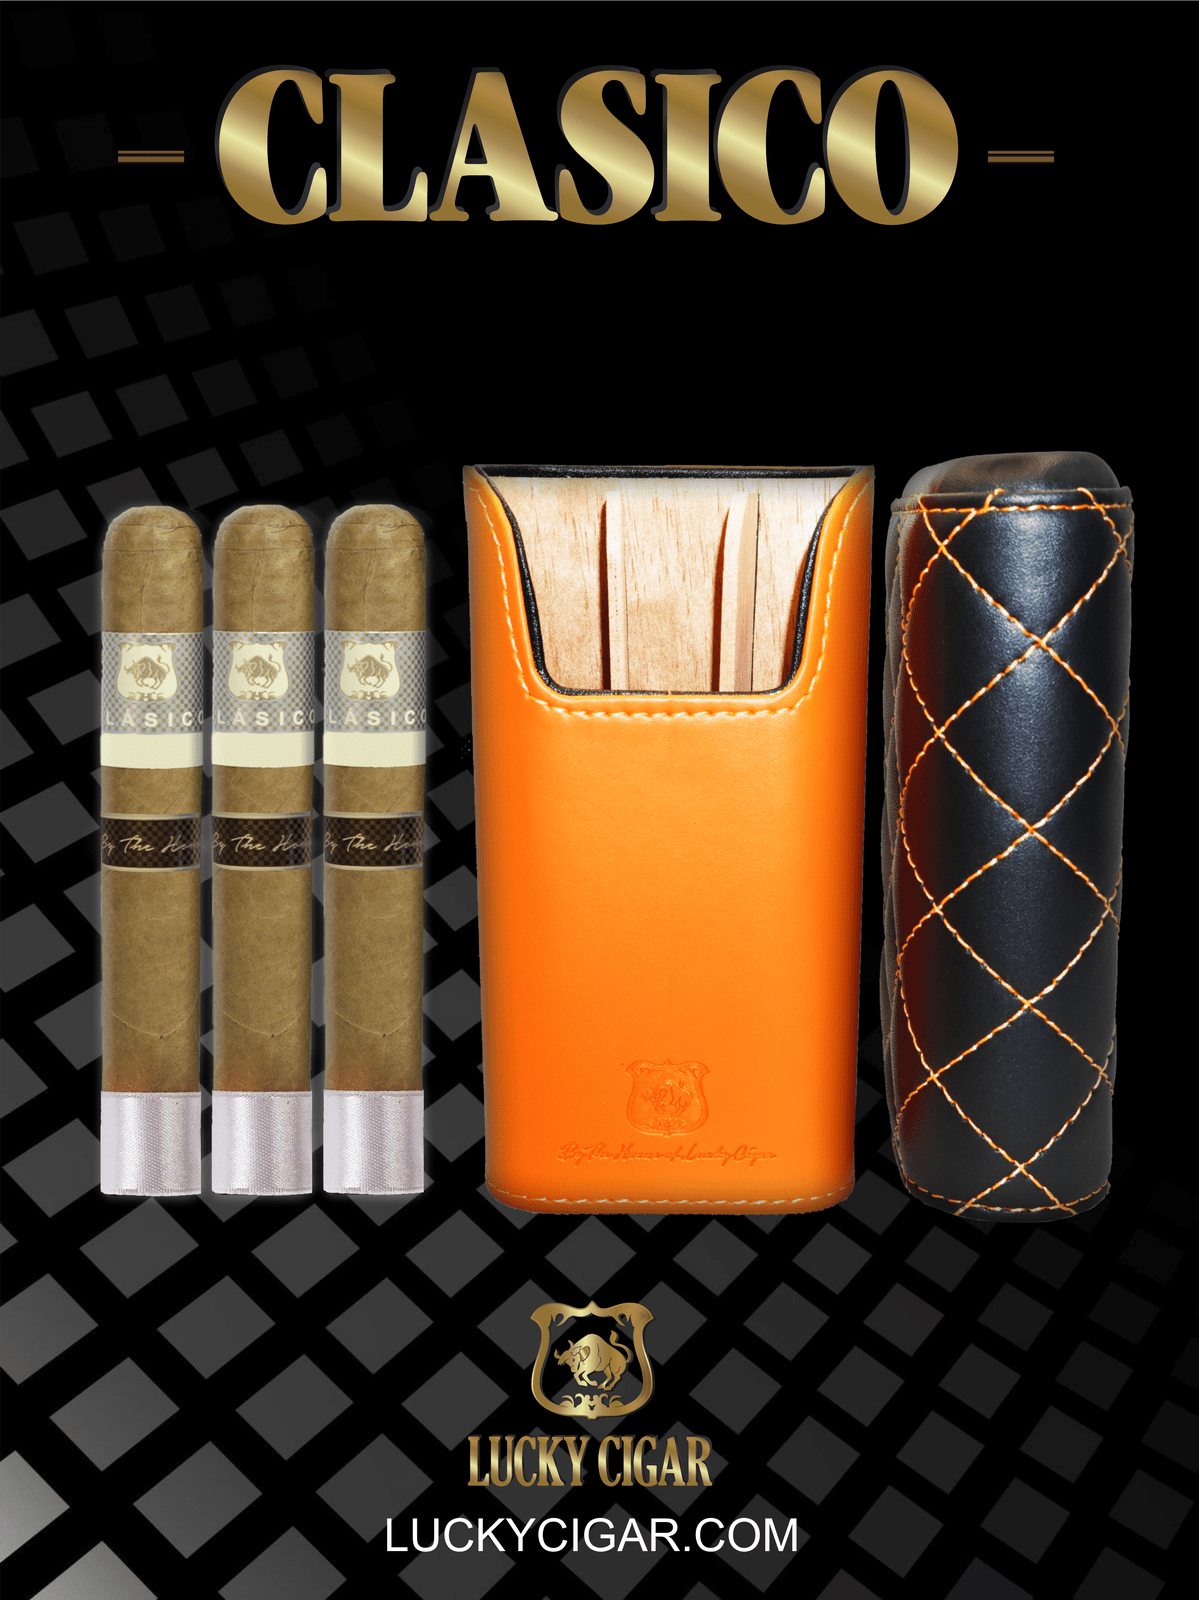 Lucky Cigar Sampler Sets: Set of 3 Classico Toro 6x50 Cigars with Travel Humidor Case